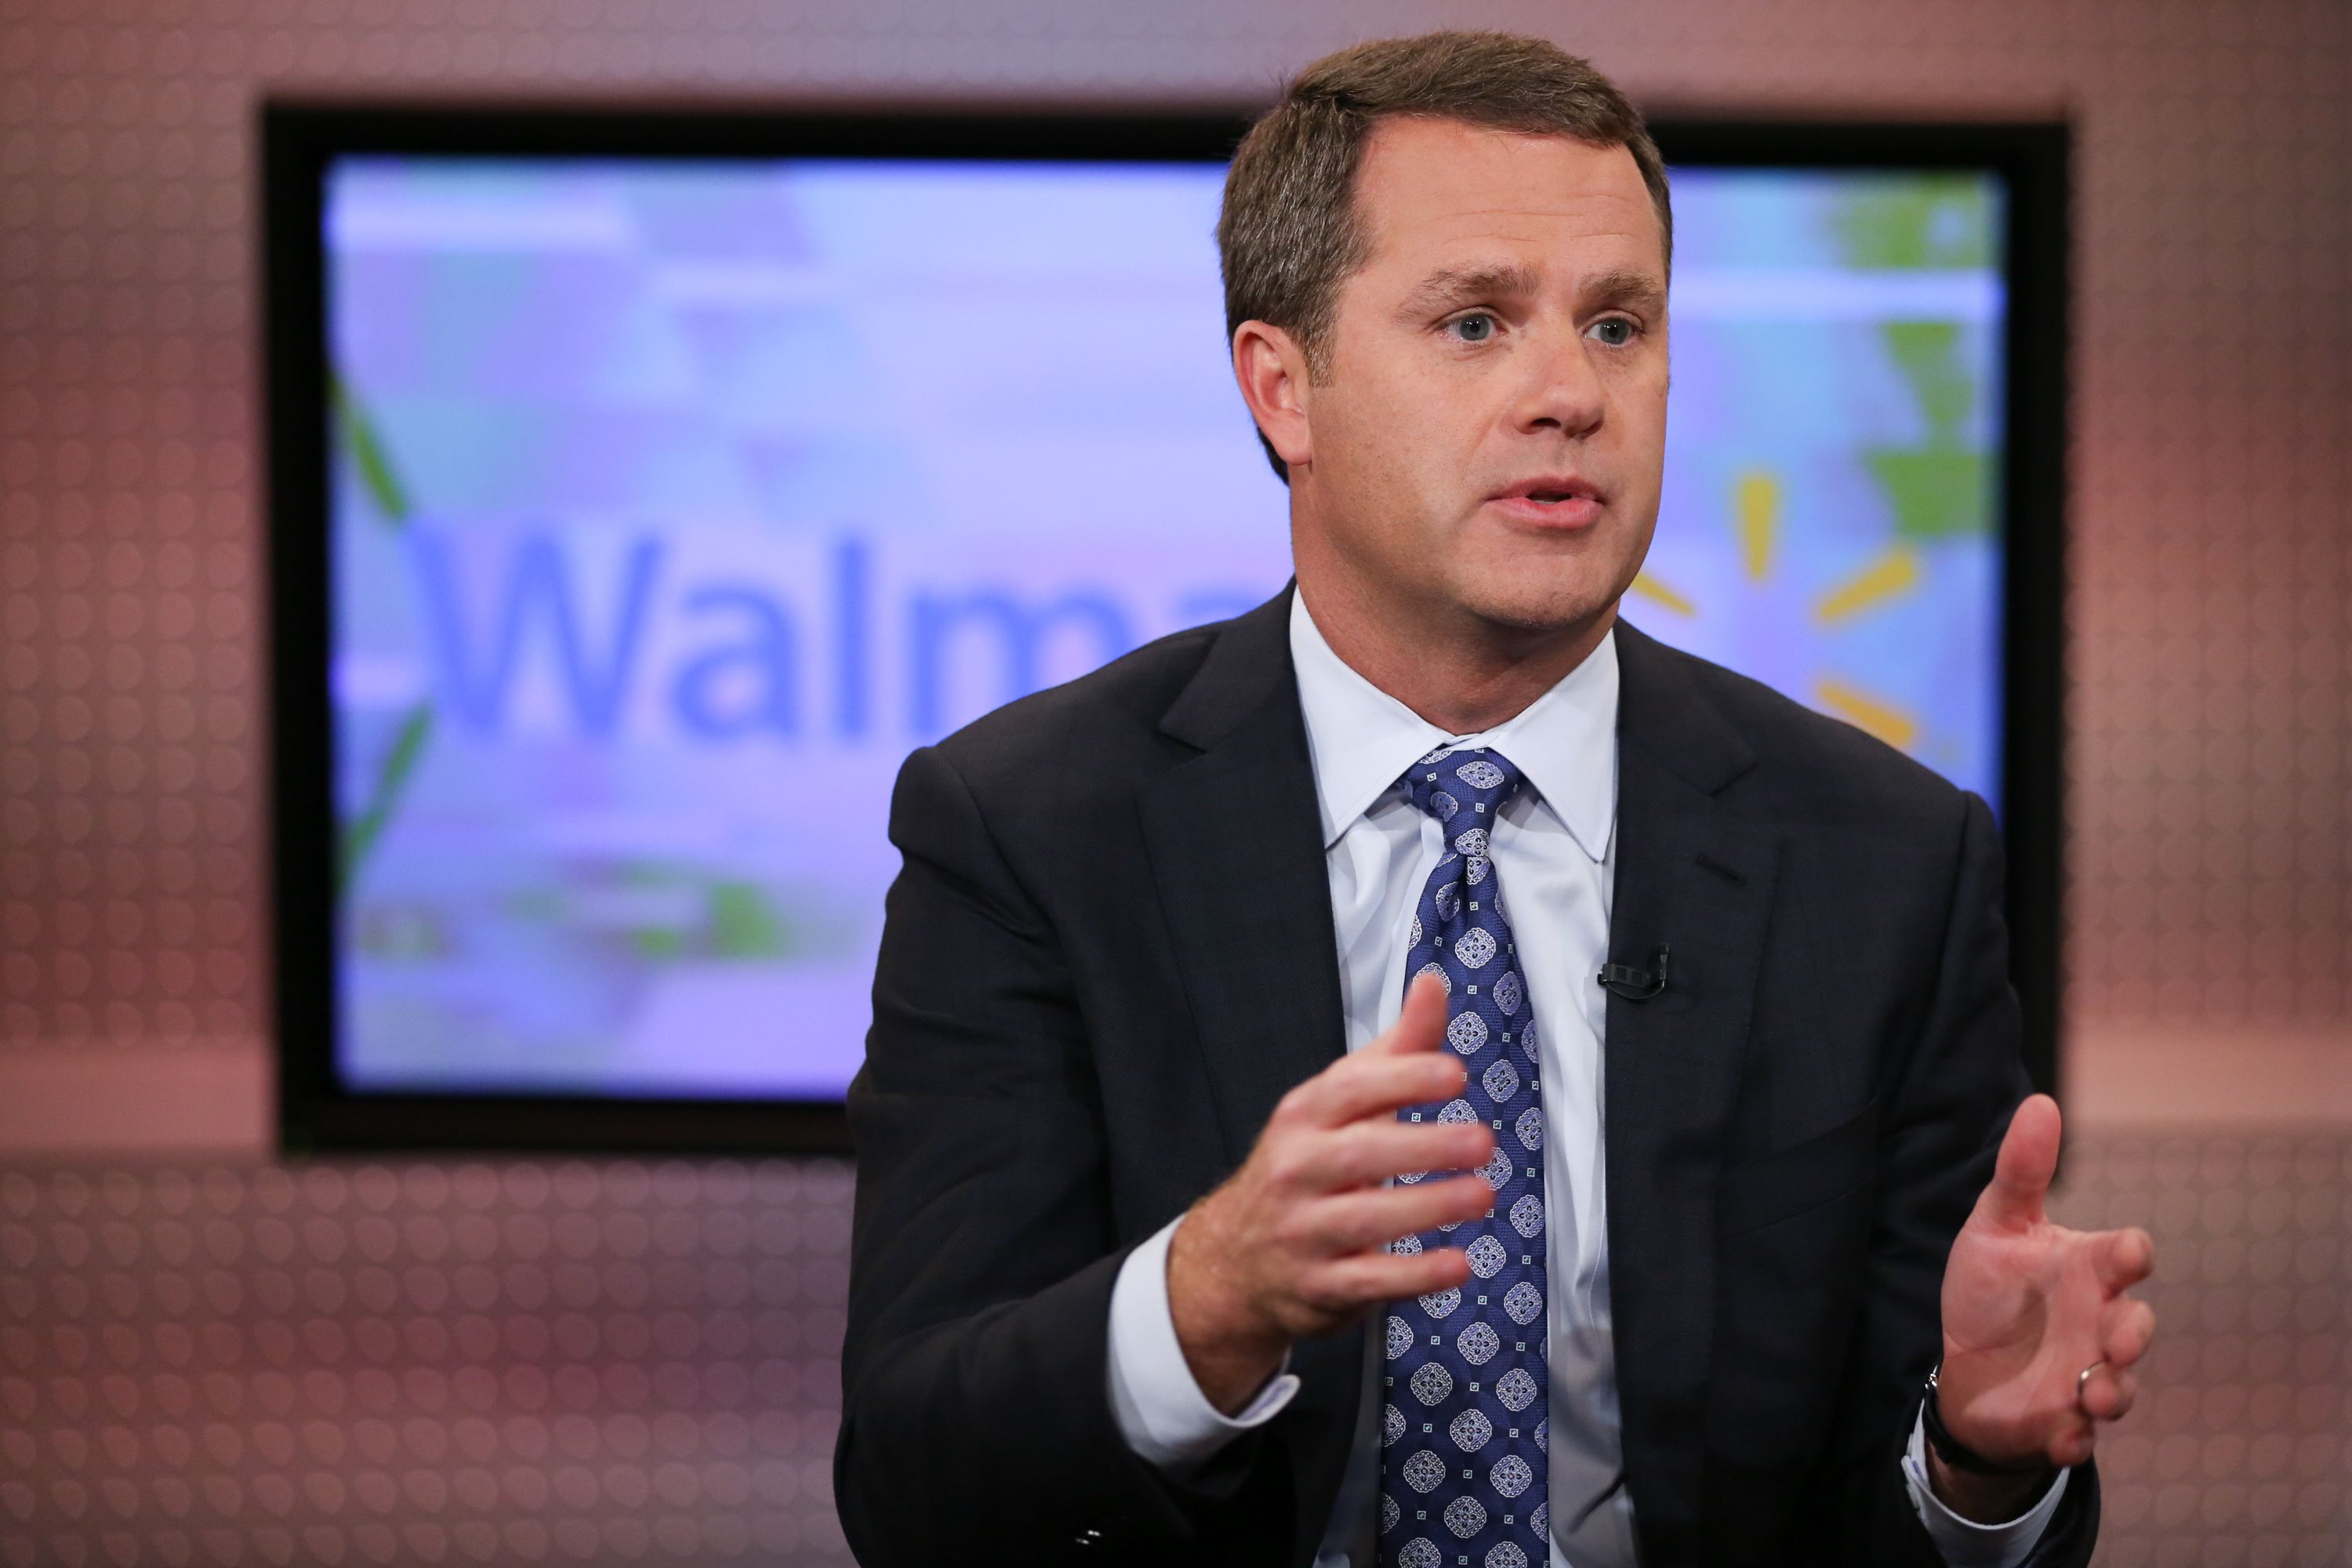 Walmart announces executive shuffle to further integrate stores and digital